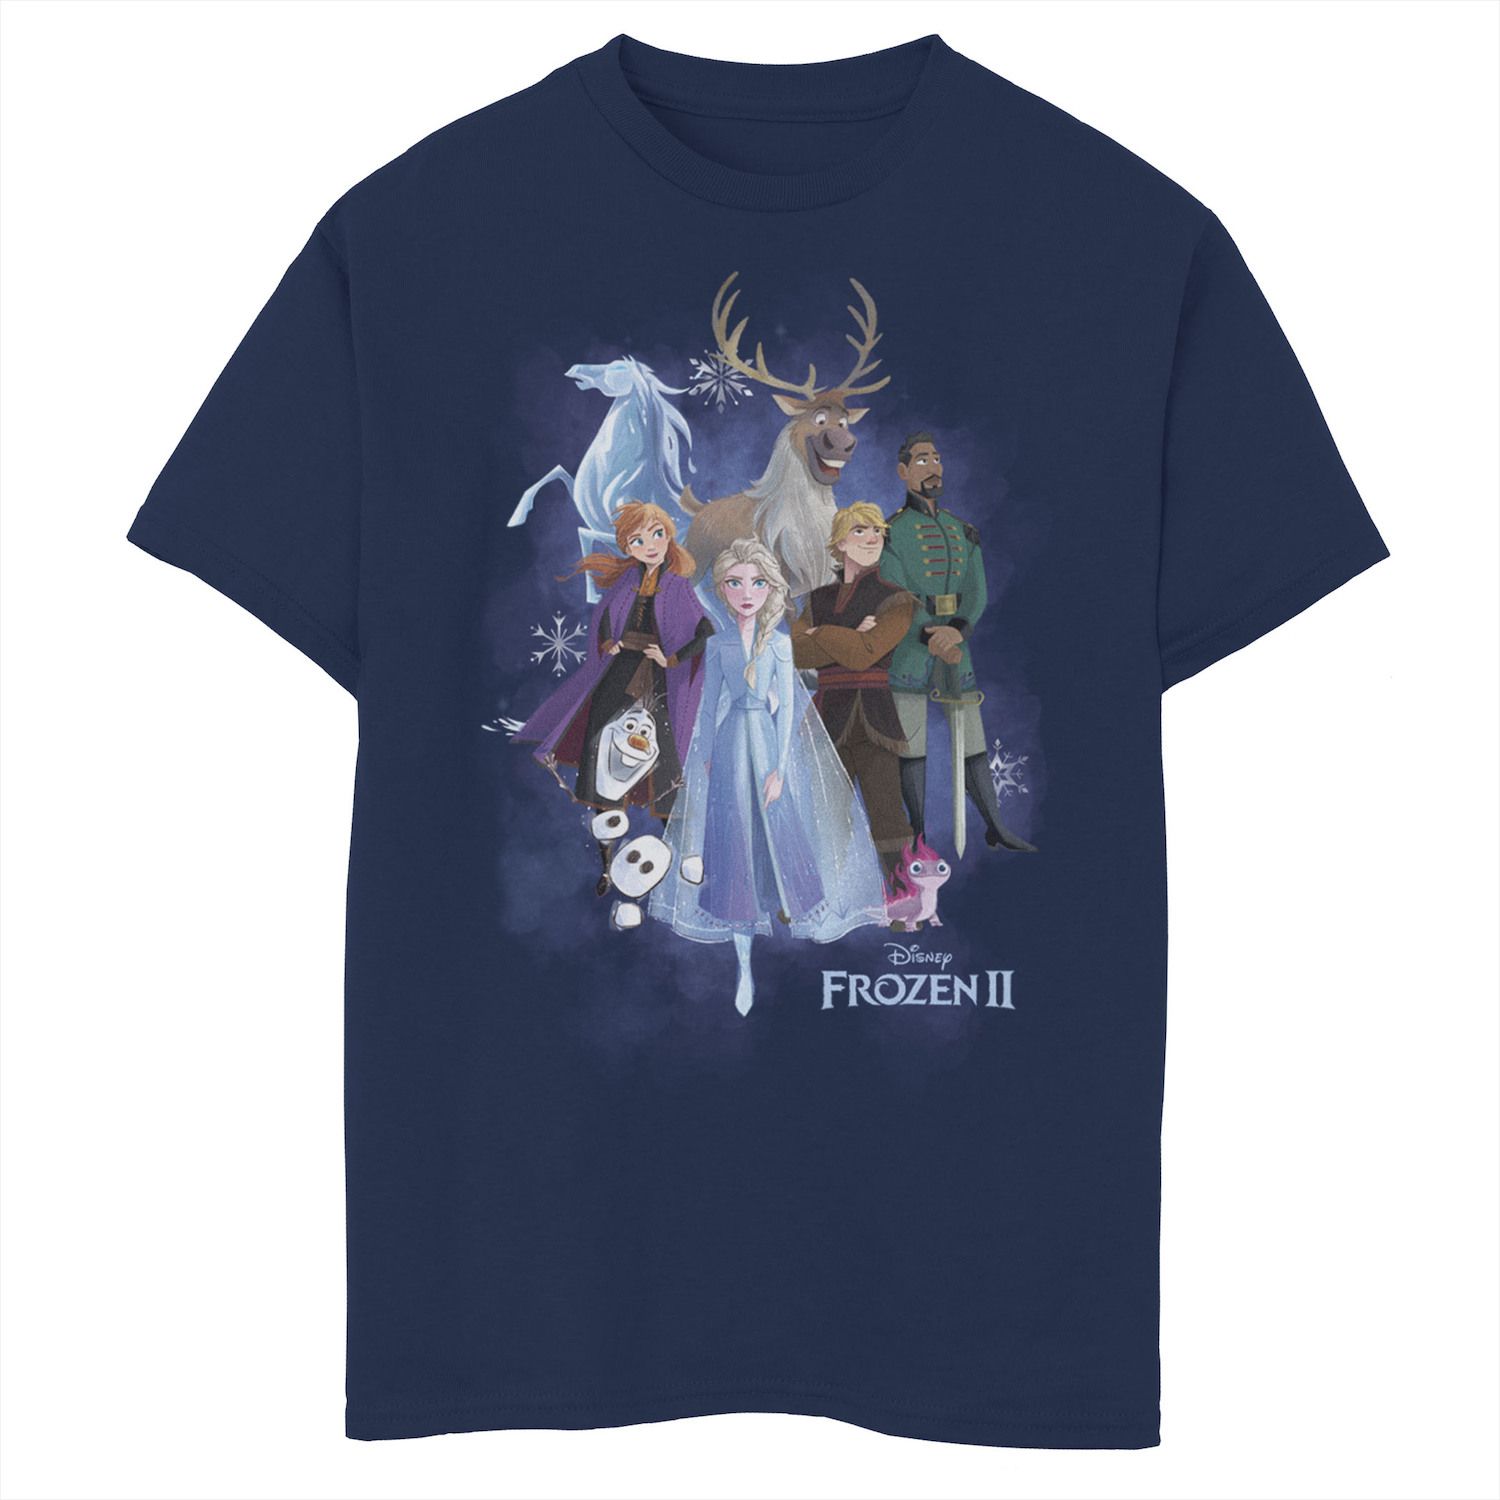 Image for Disney 's Frozen 2 Boys 8-20 Group Shot Walking Into Forest Graphic Tee at Kohl's.